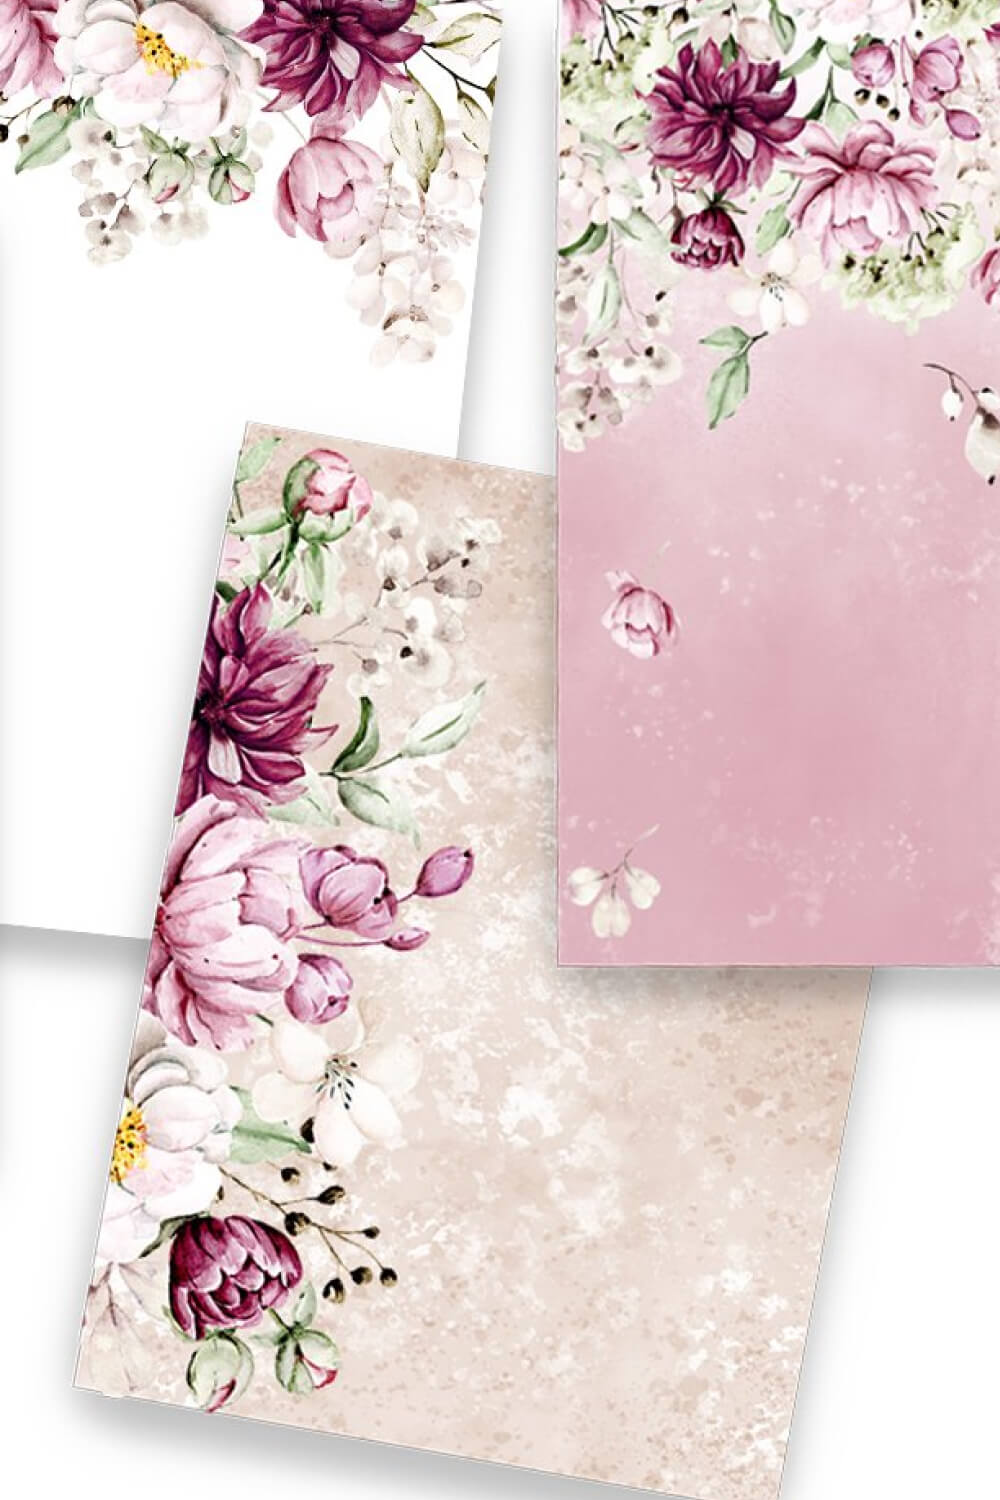 Cards of Peonies on White, Pink and Beige Background.